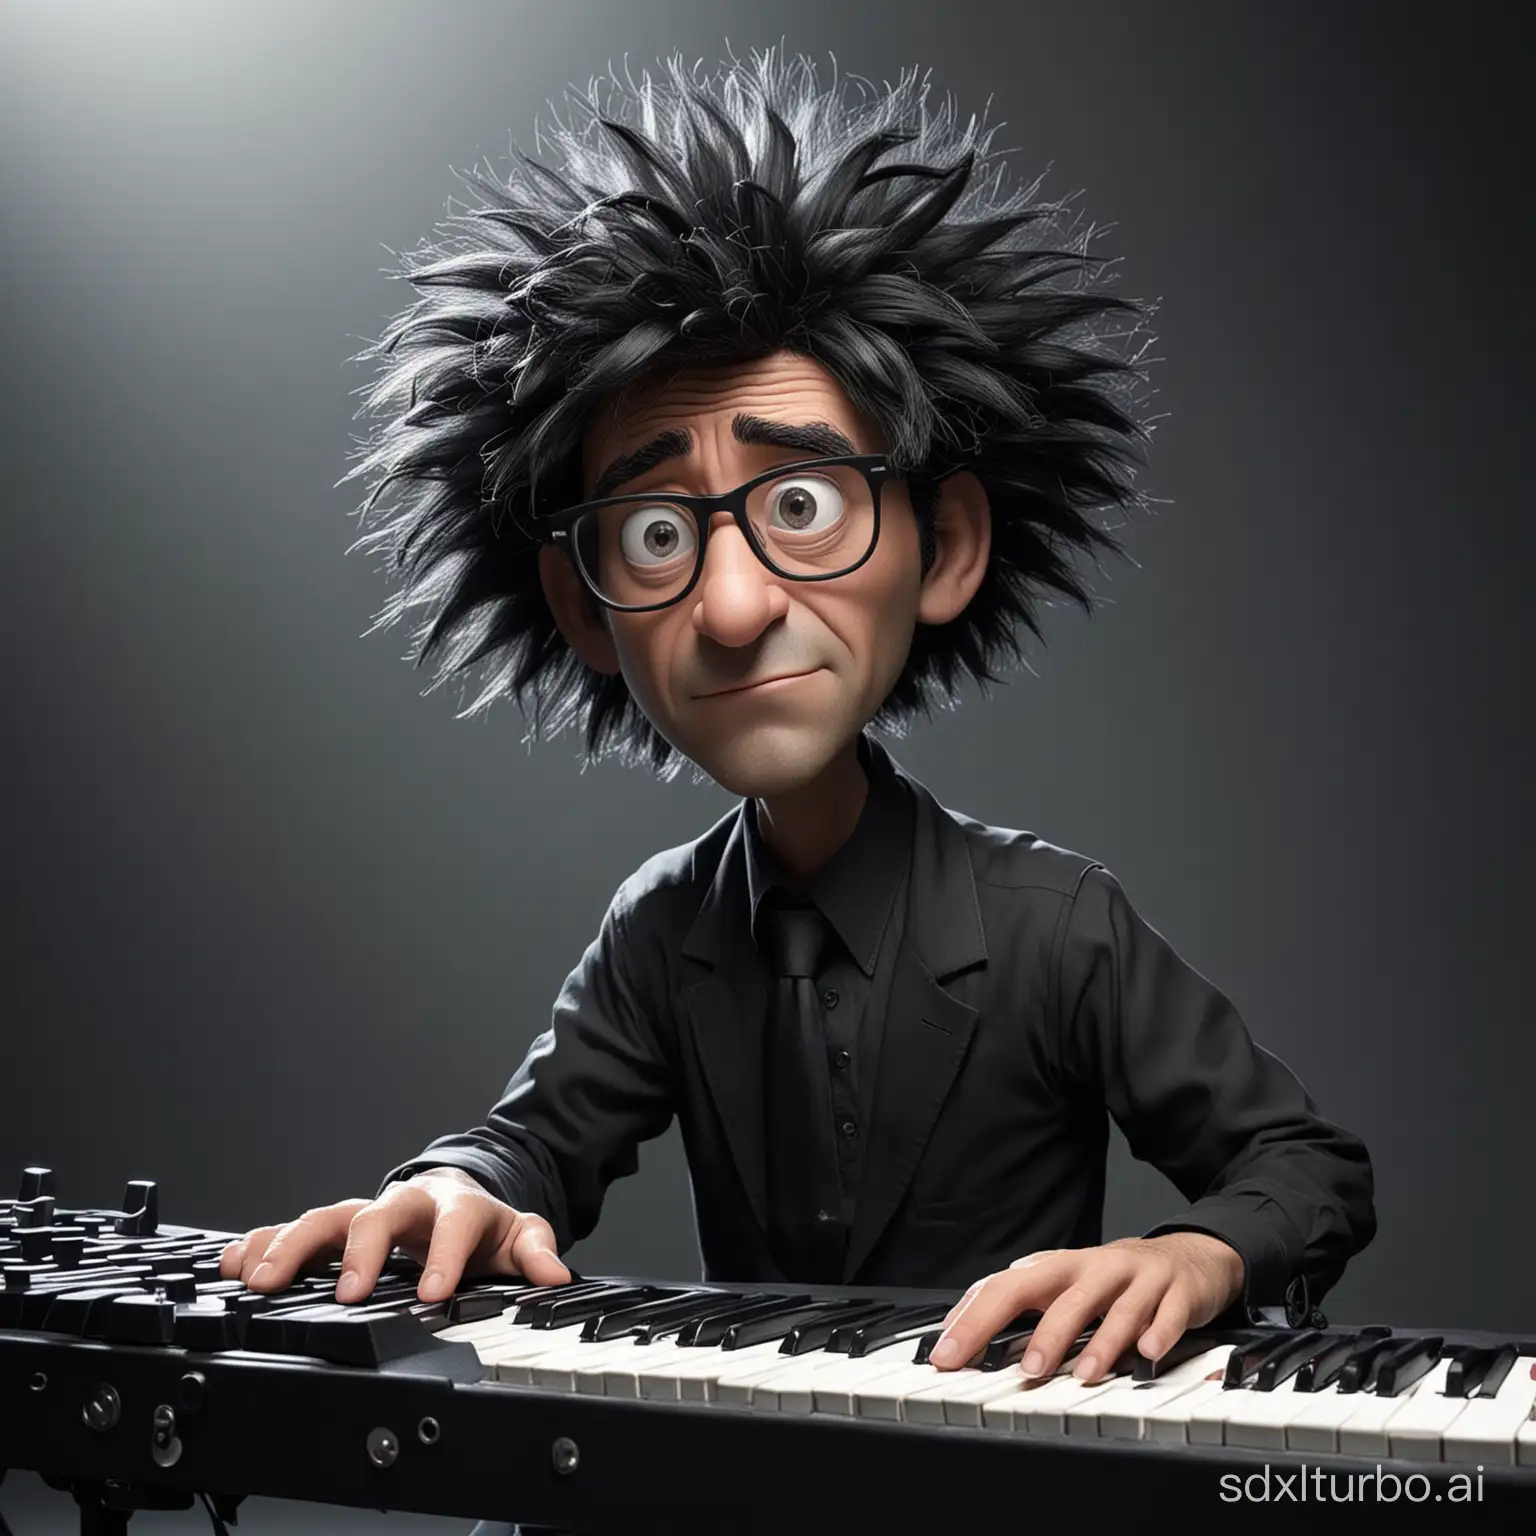 French-Musician-Playing-Keyboard-in-Pixar-Cartoon-Style